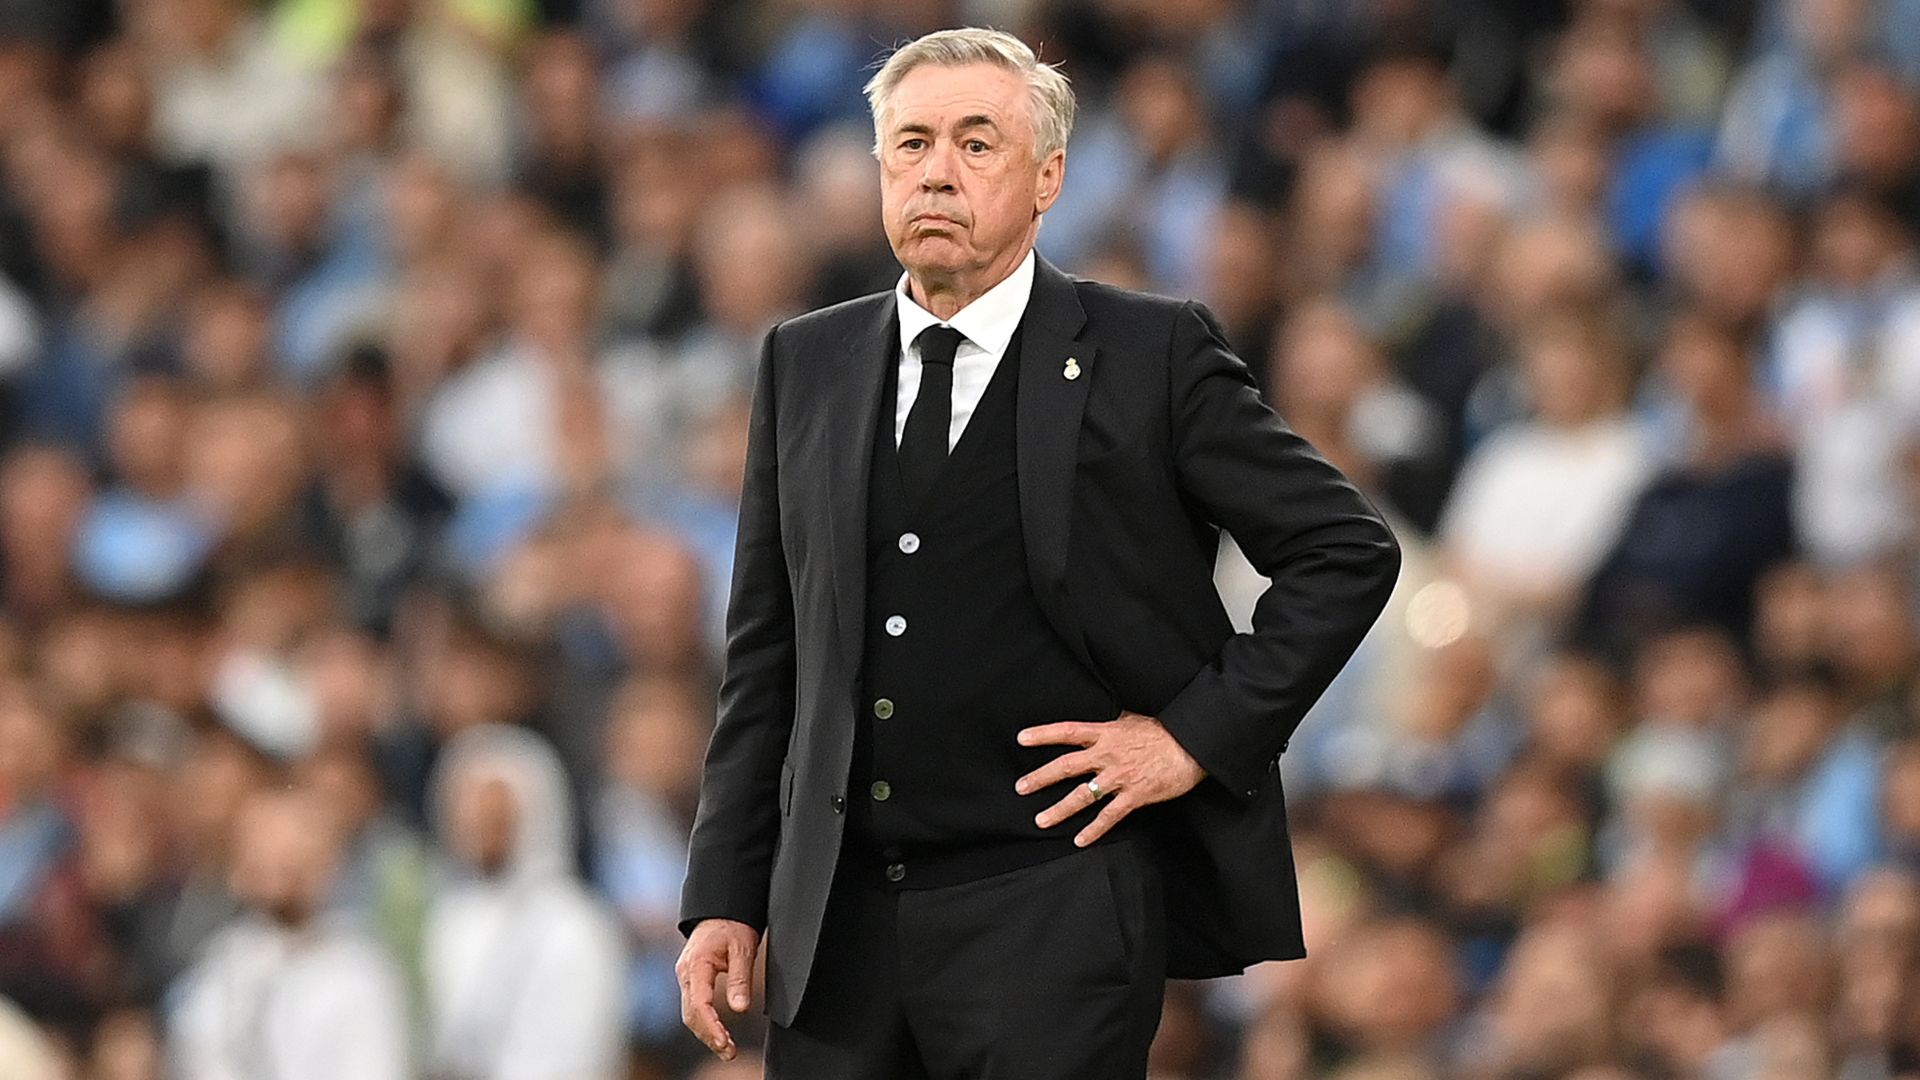 Ancelotti during a Real Madrid match (Credit: Getty Images)